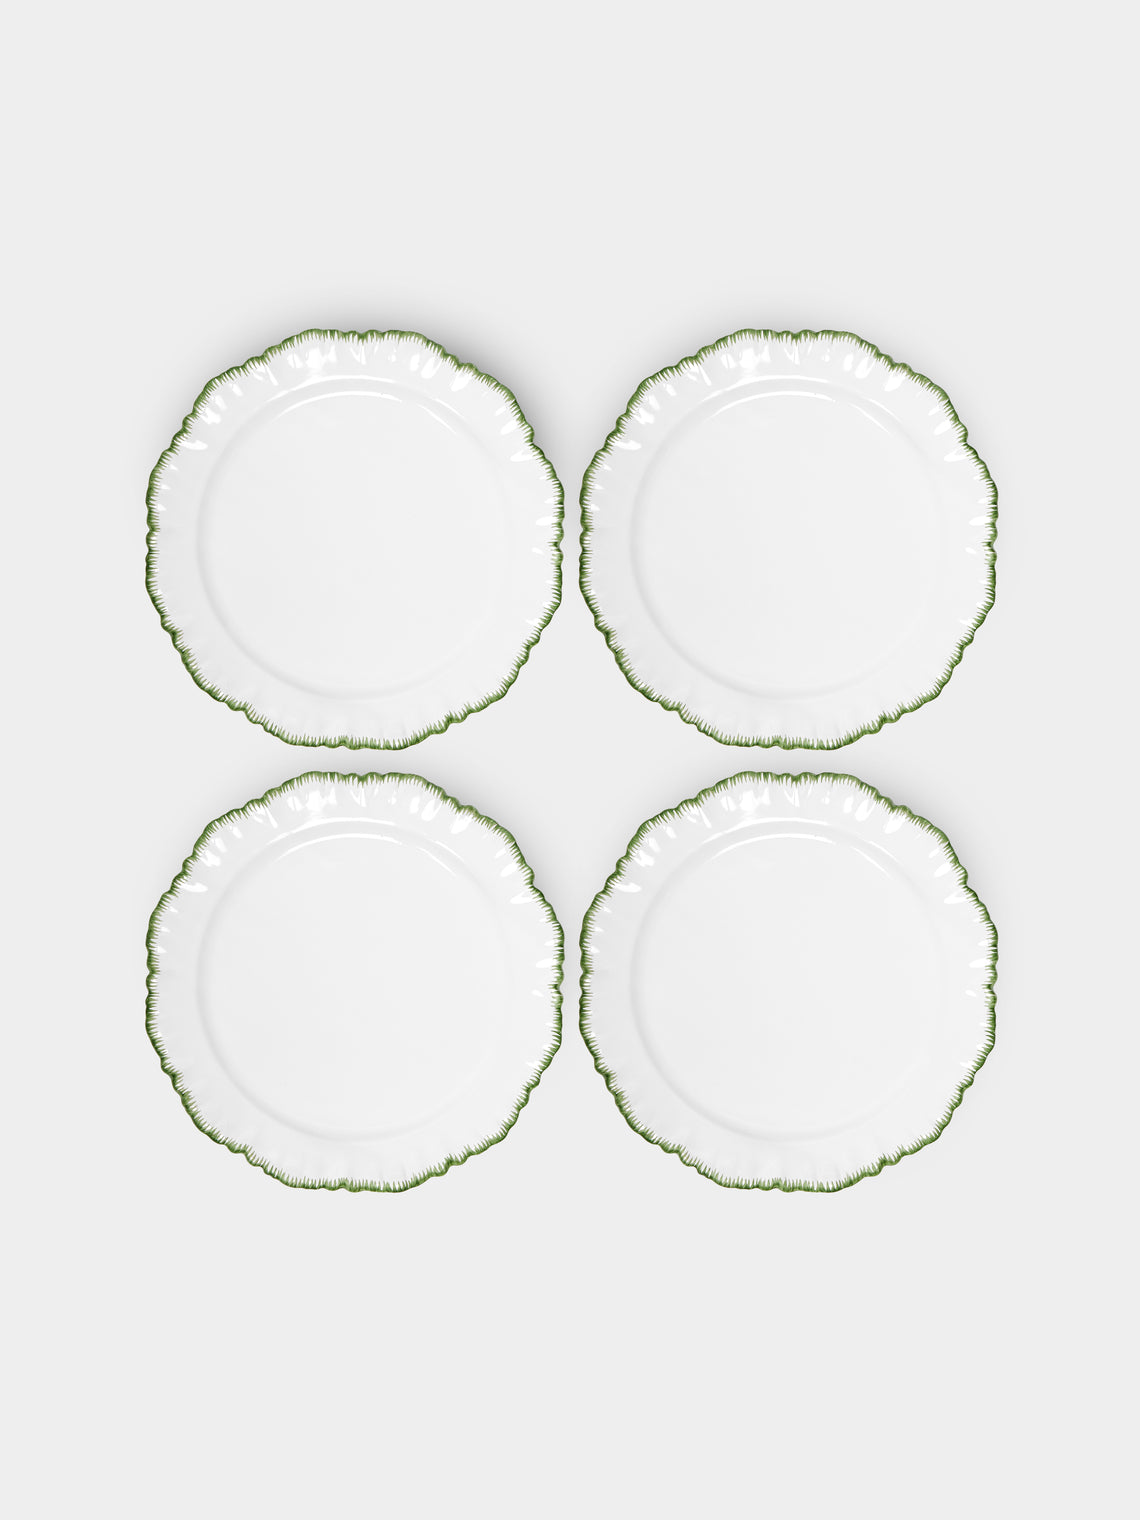 Atelier Soleil - Combed Edge Hand-Painted Ceramic Dinner Plates (Set of 4) -  - ABASK